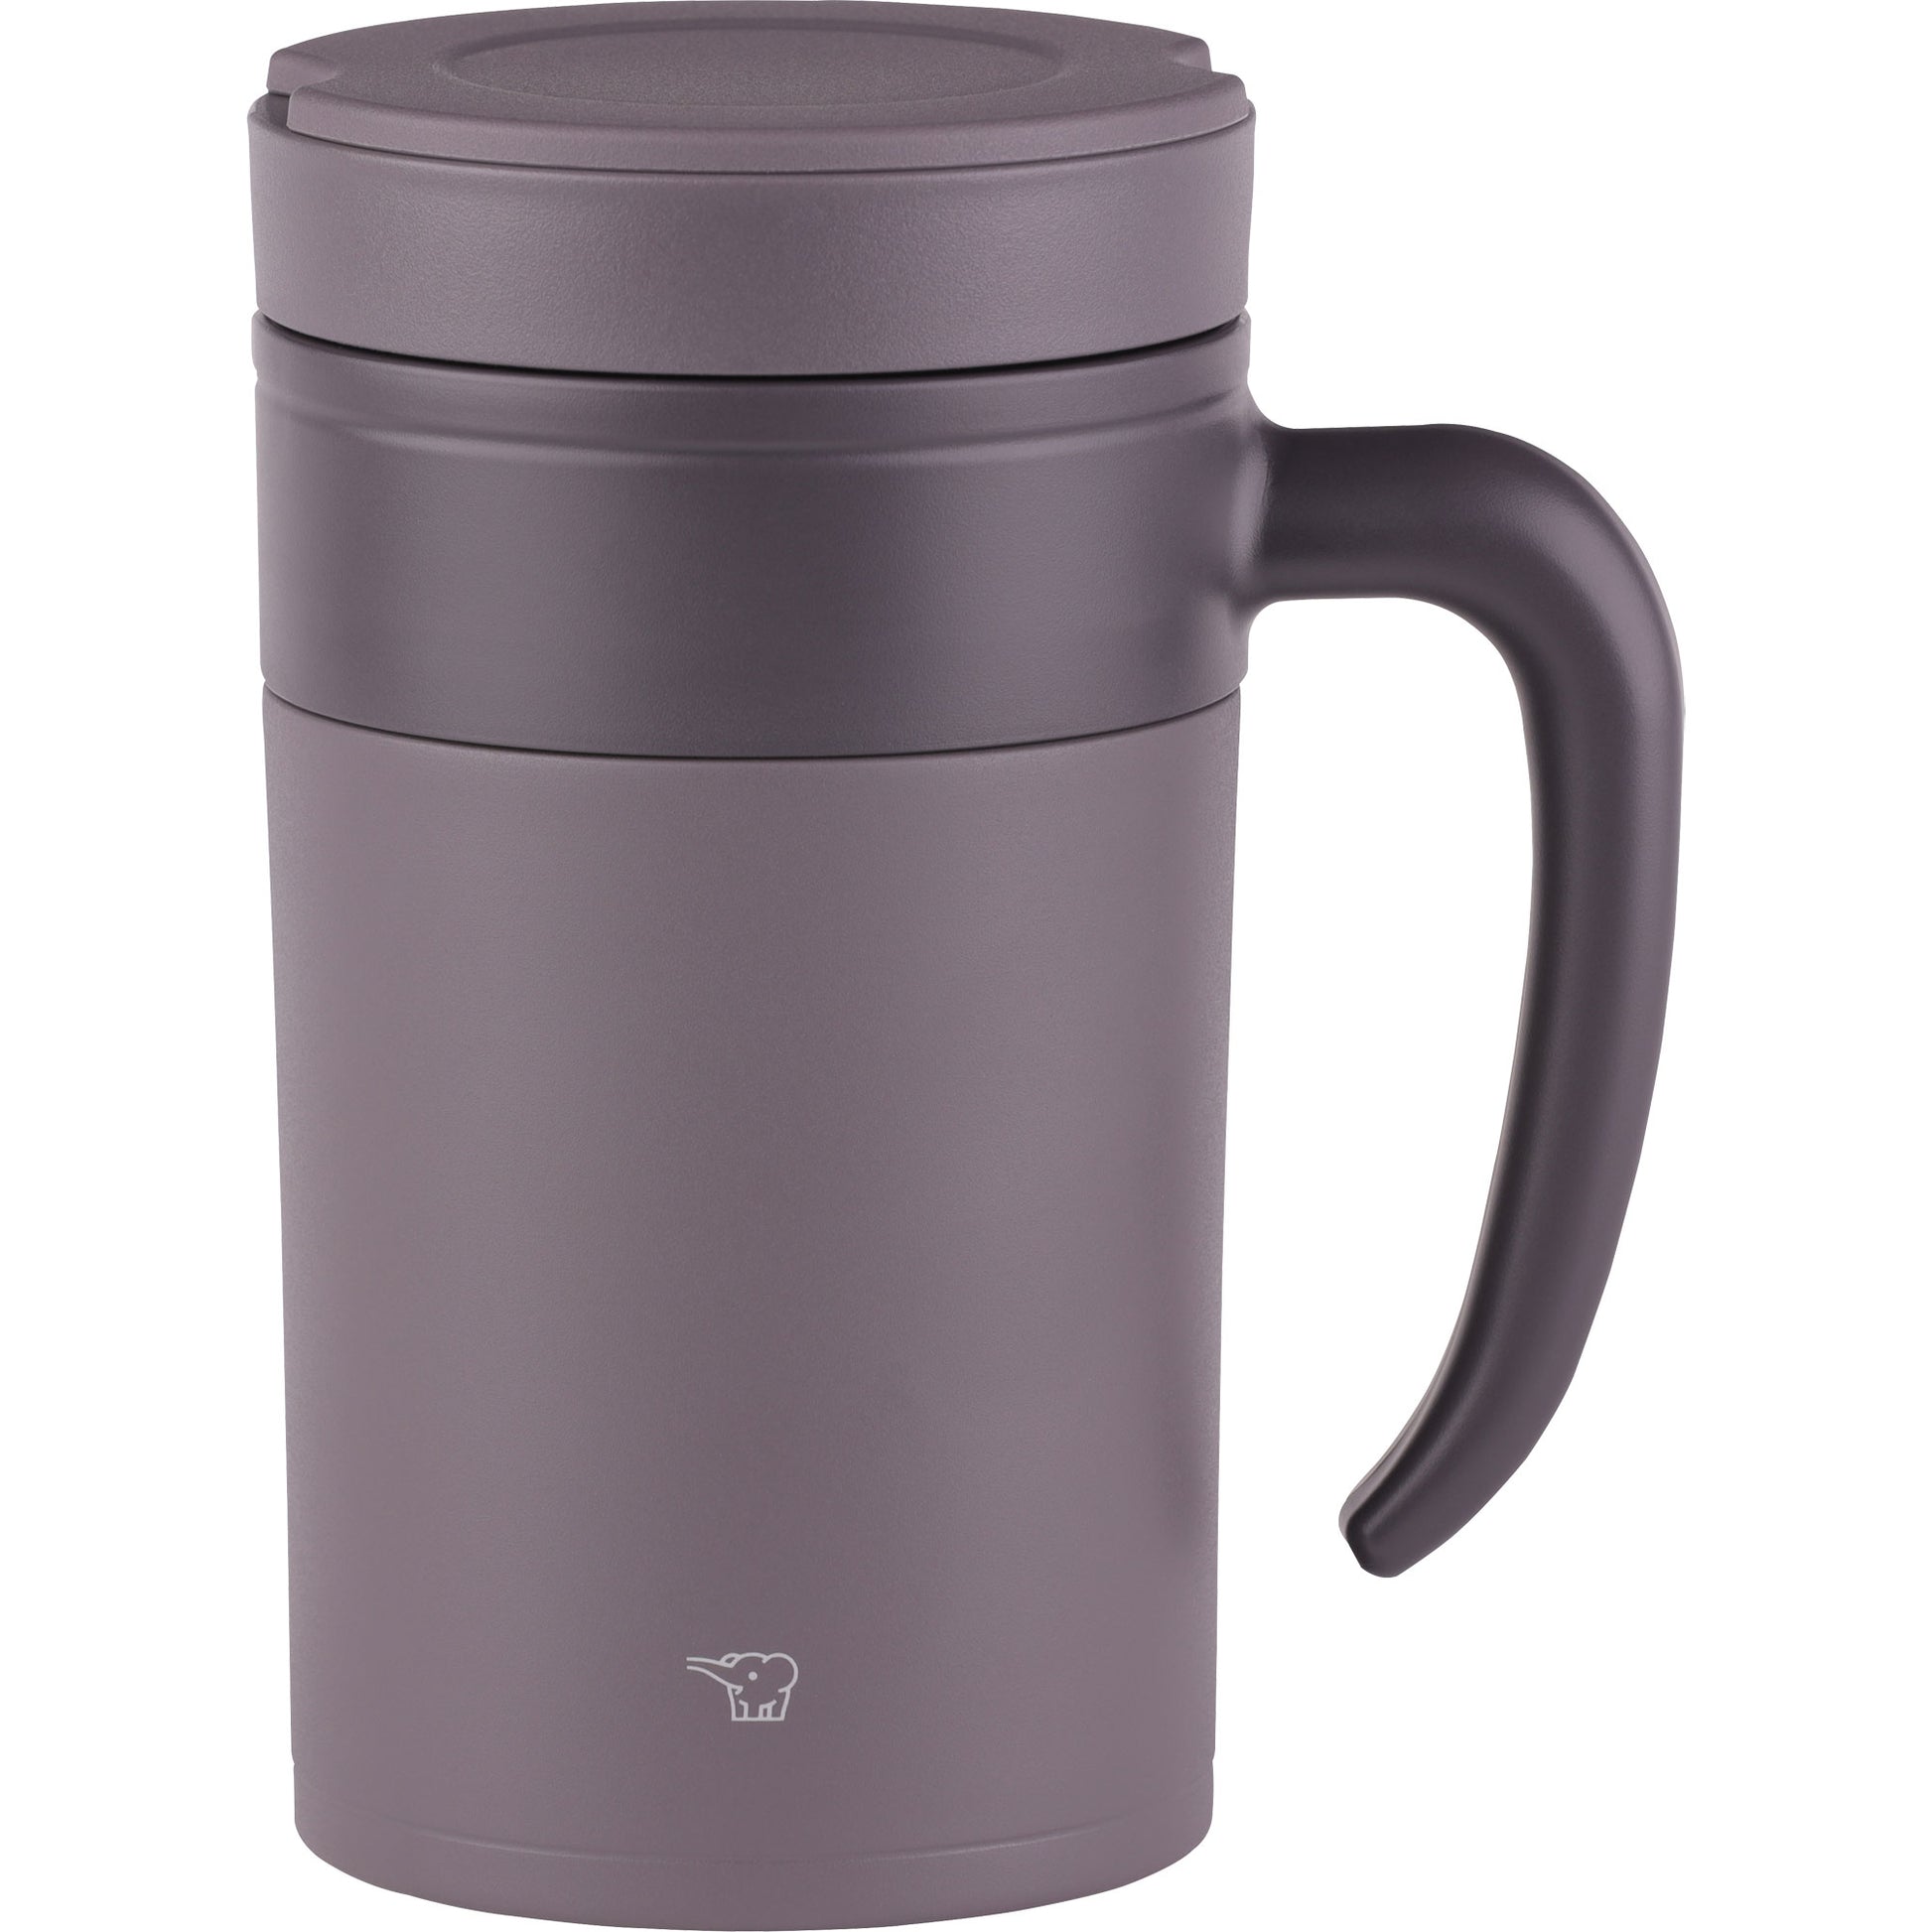 Insulated Mug with Handle and Lid - Stainless Steel